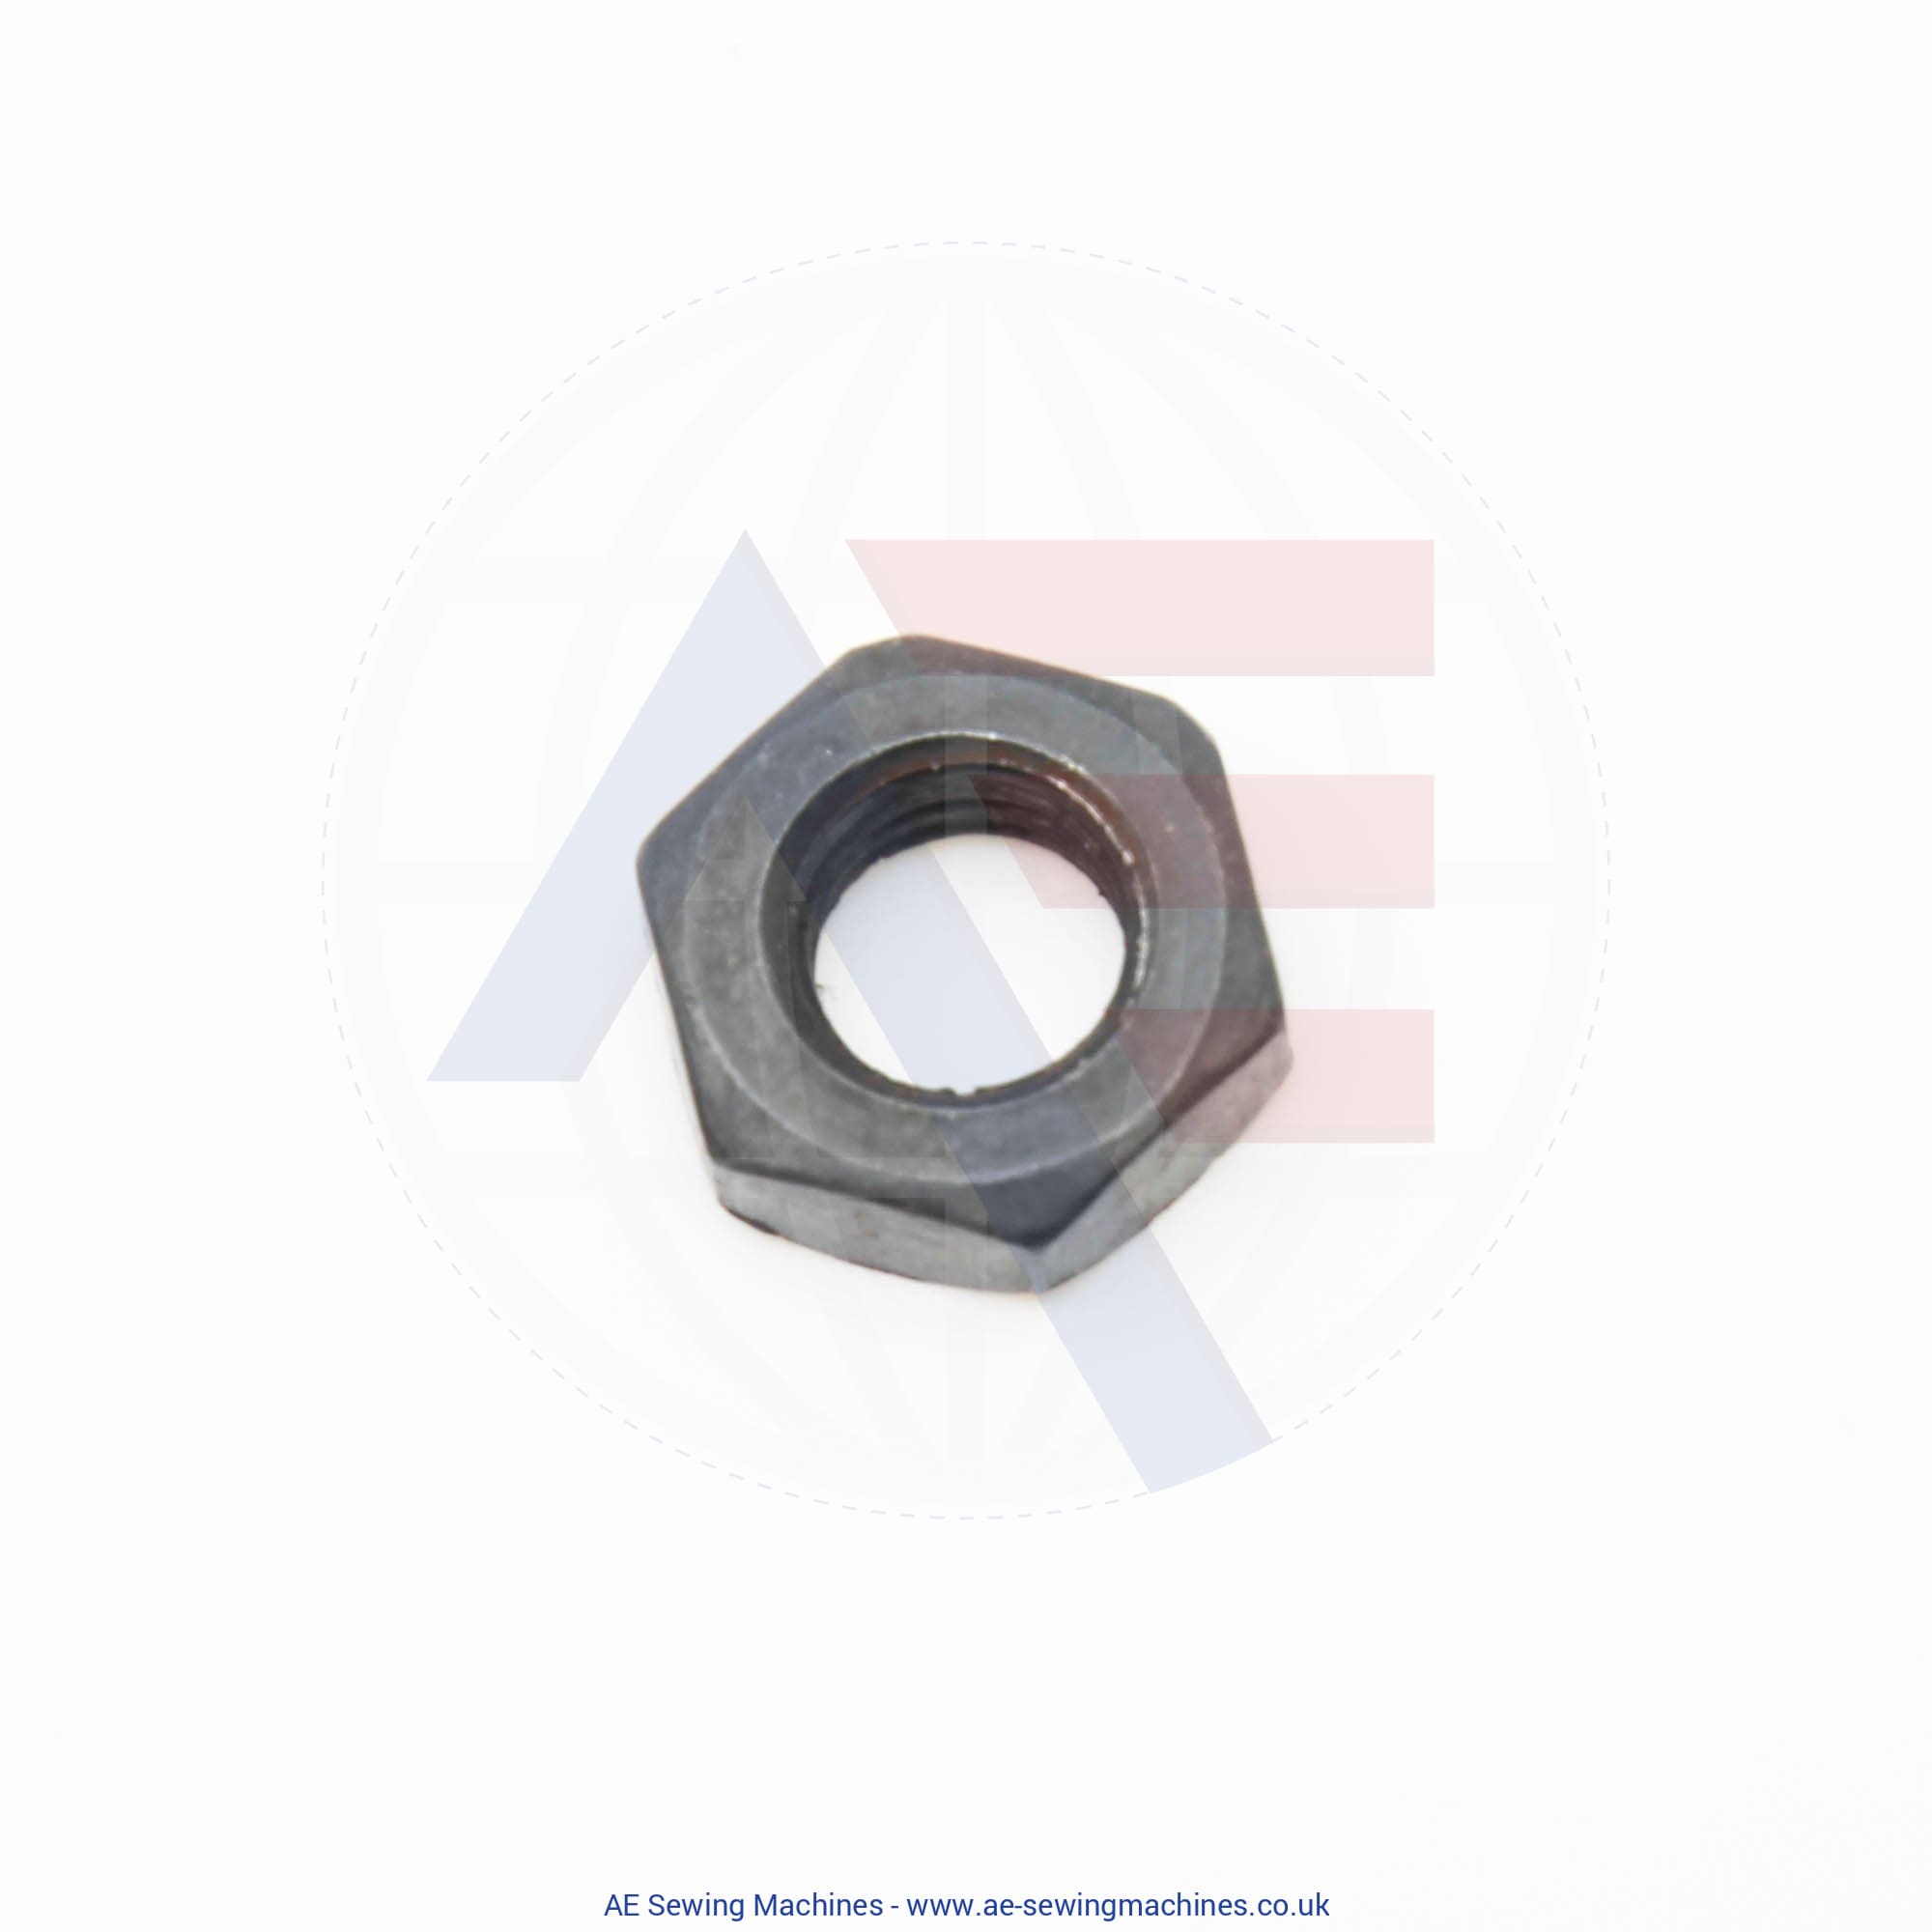 Dayang Rsd-100 S182 Nut For Knife Gear Screw